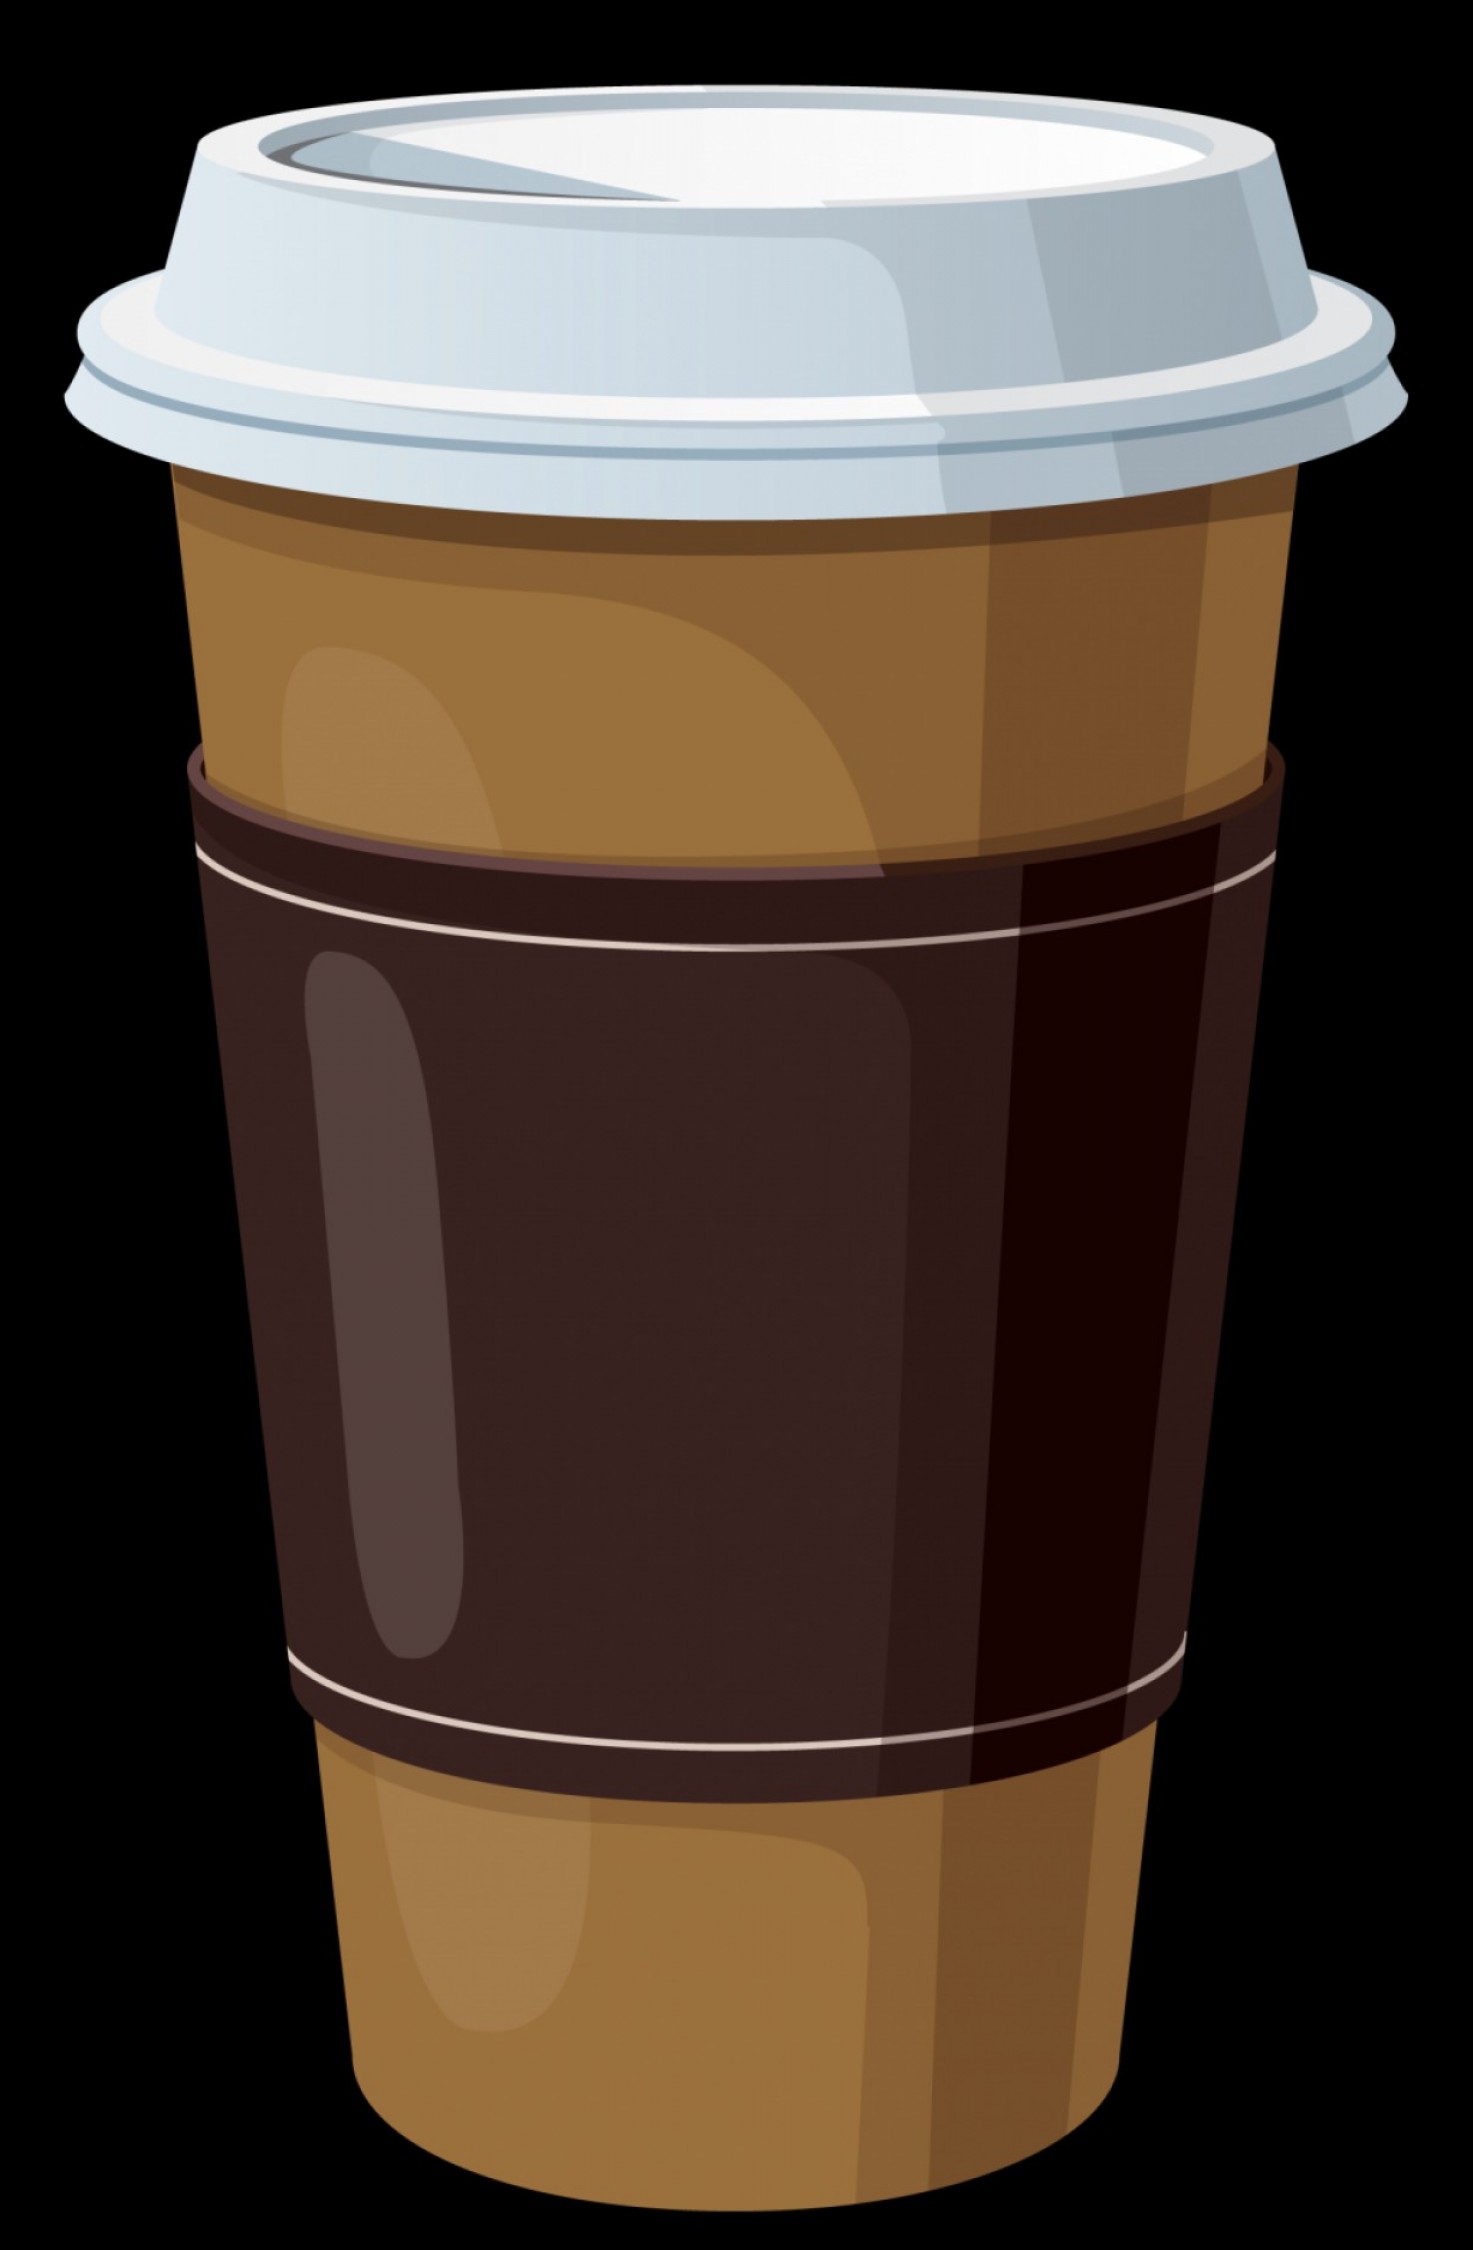 Download Starbucks Cup Vector at Vectorified.com | Collection of ...